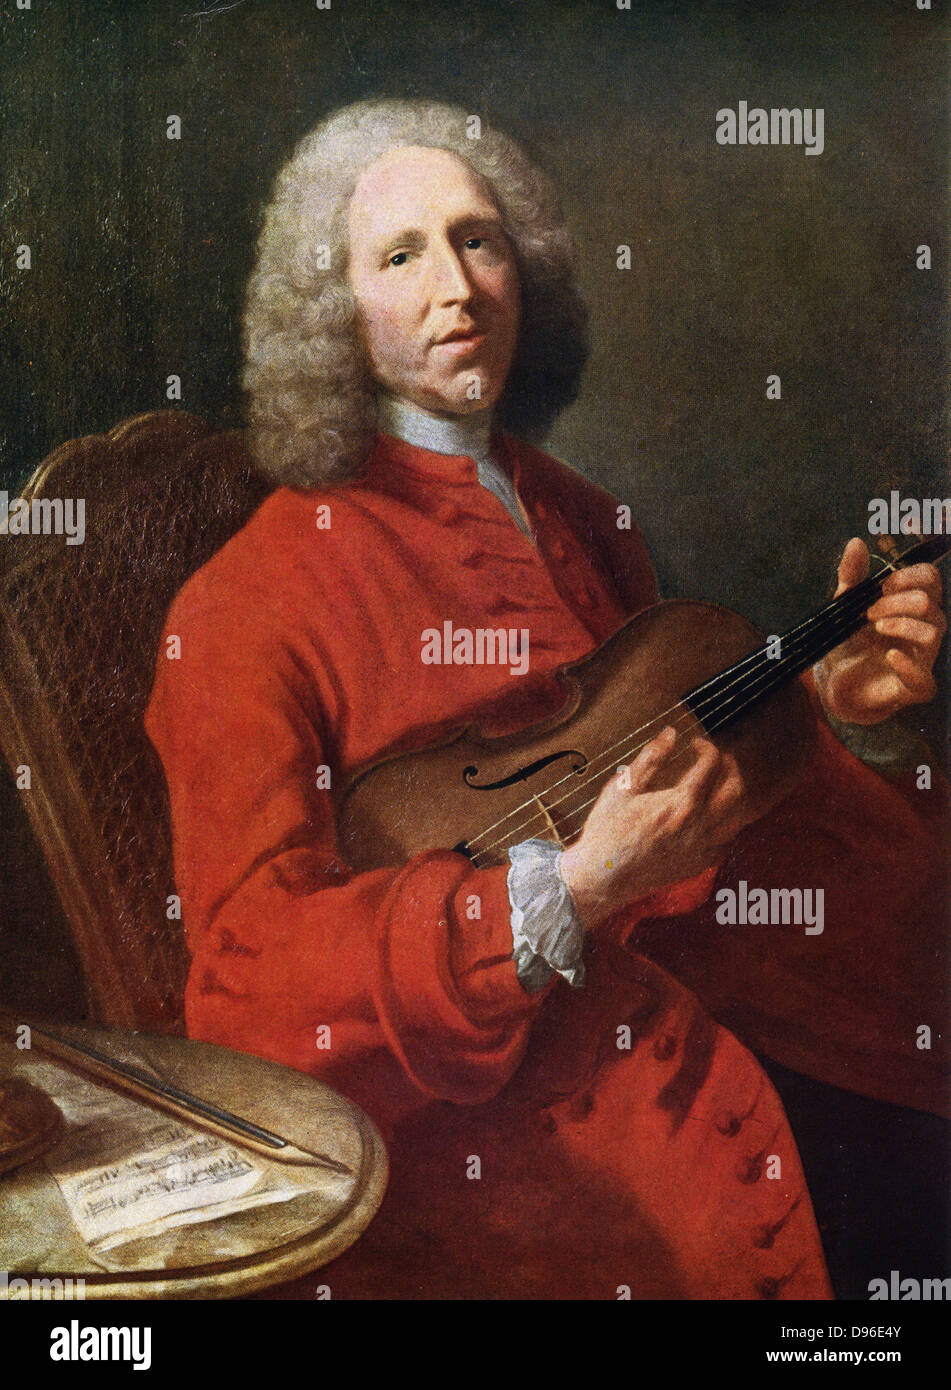 Jean-Philippe Rameau (1683-1764)  French composer and musical theorist. Stock Photo